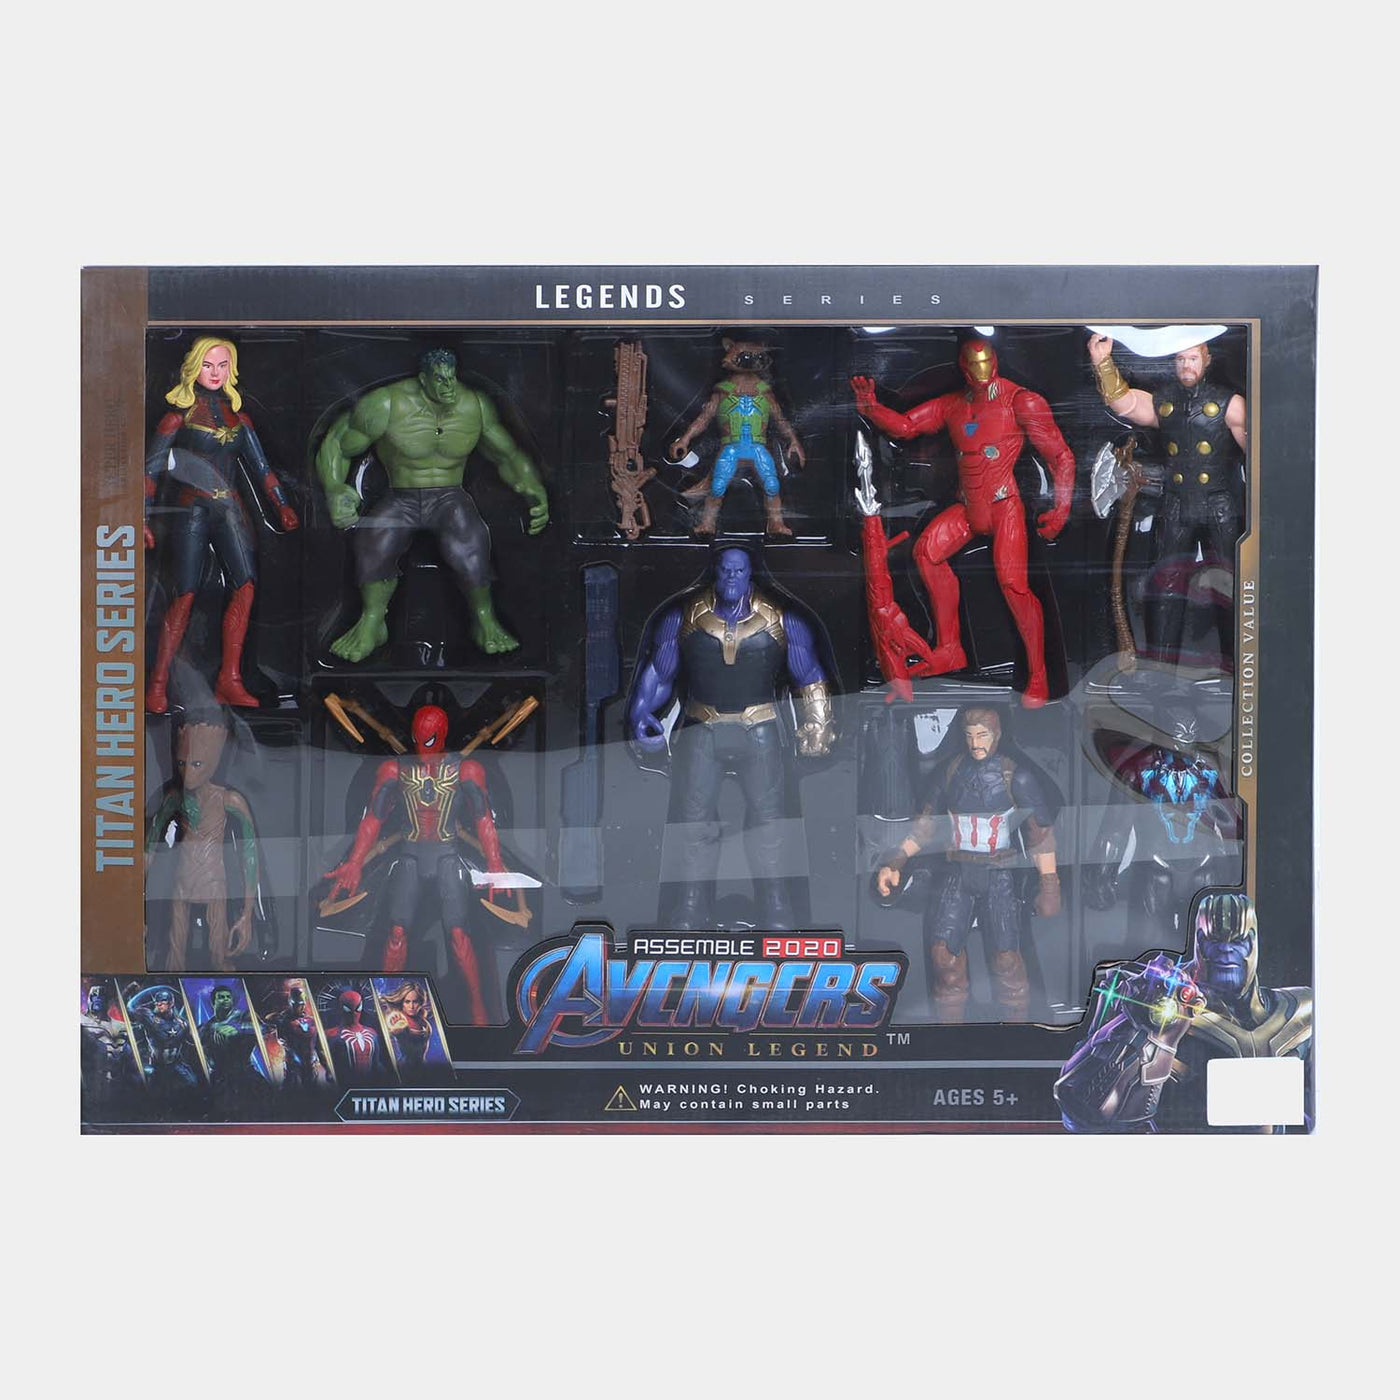 Character Action Heroes Play Set